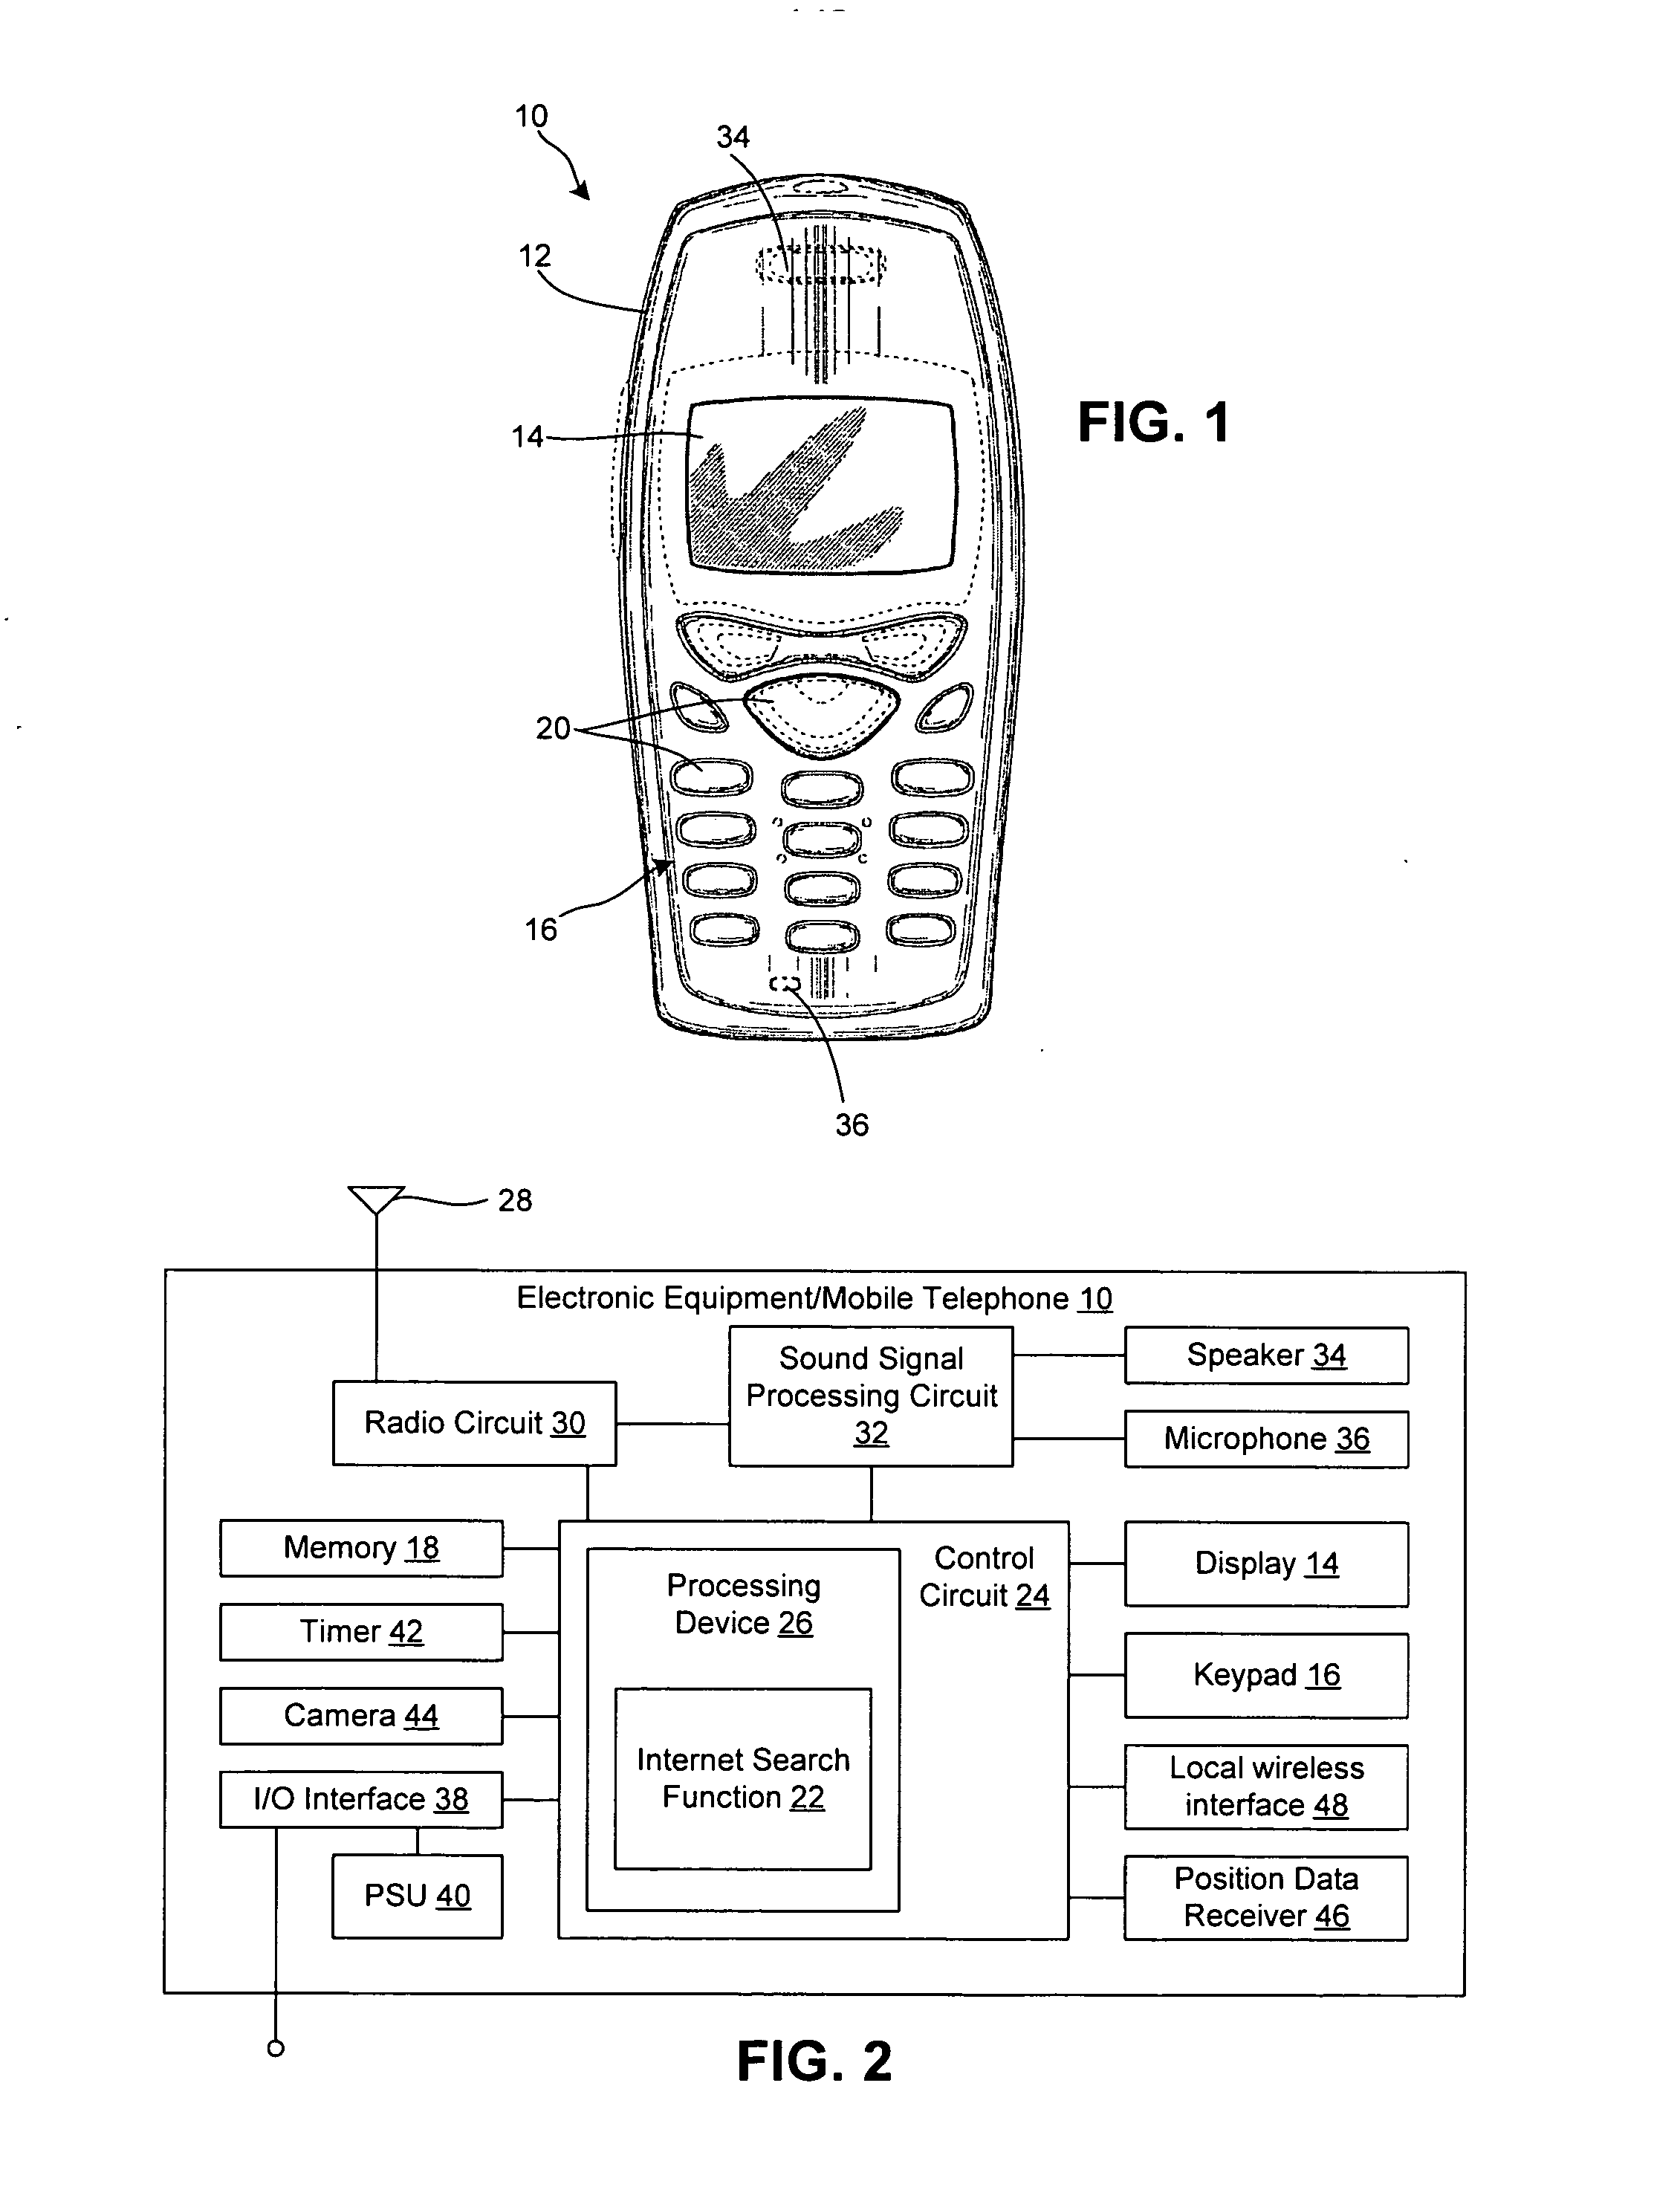 Method and system for conducting an internet search using a mobile radio terminal